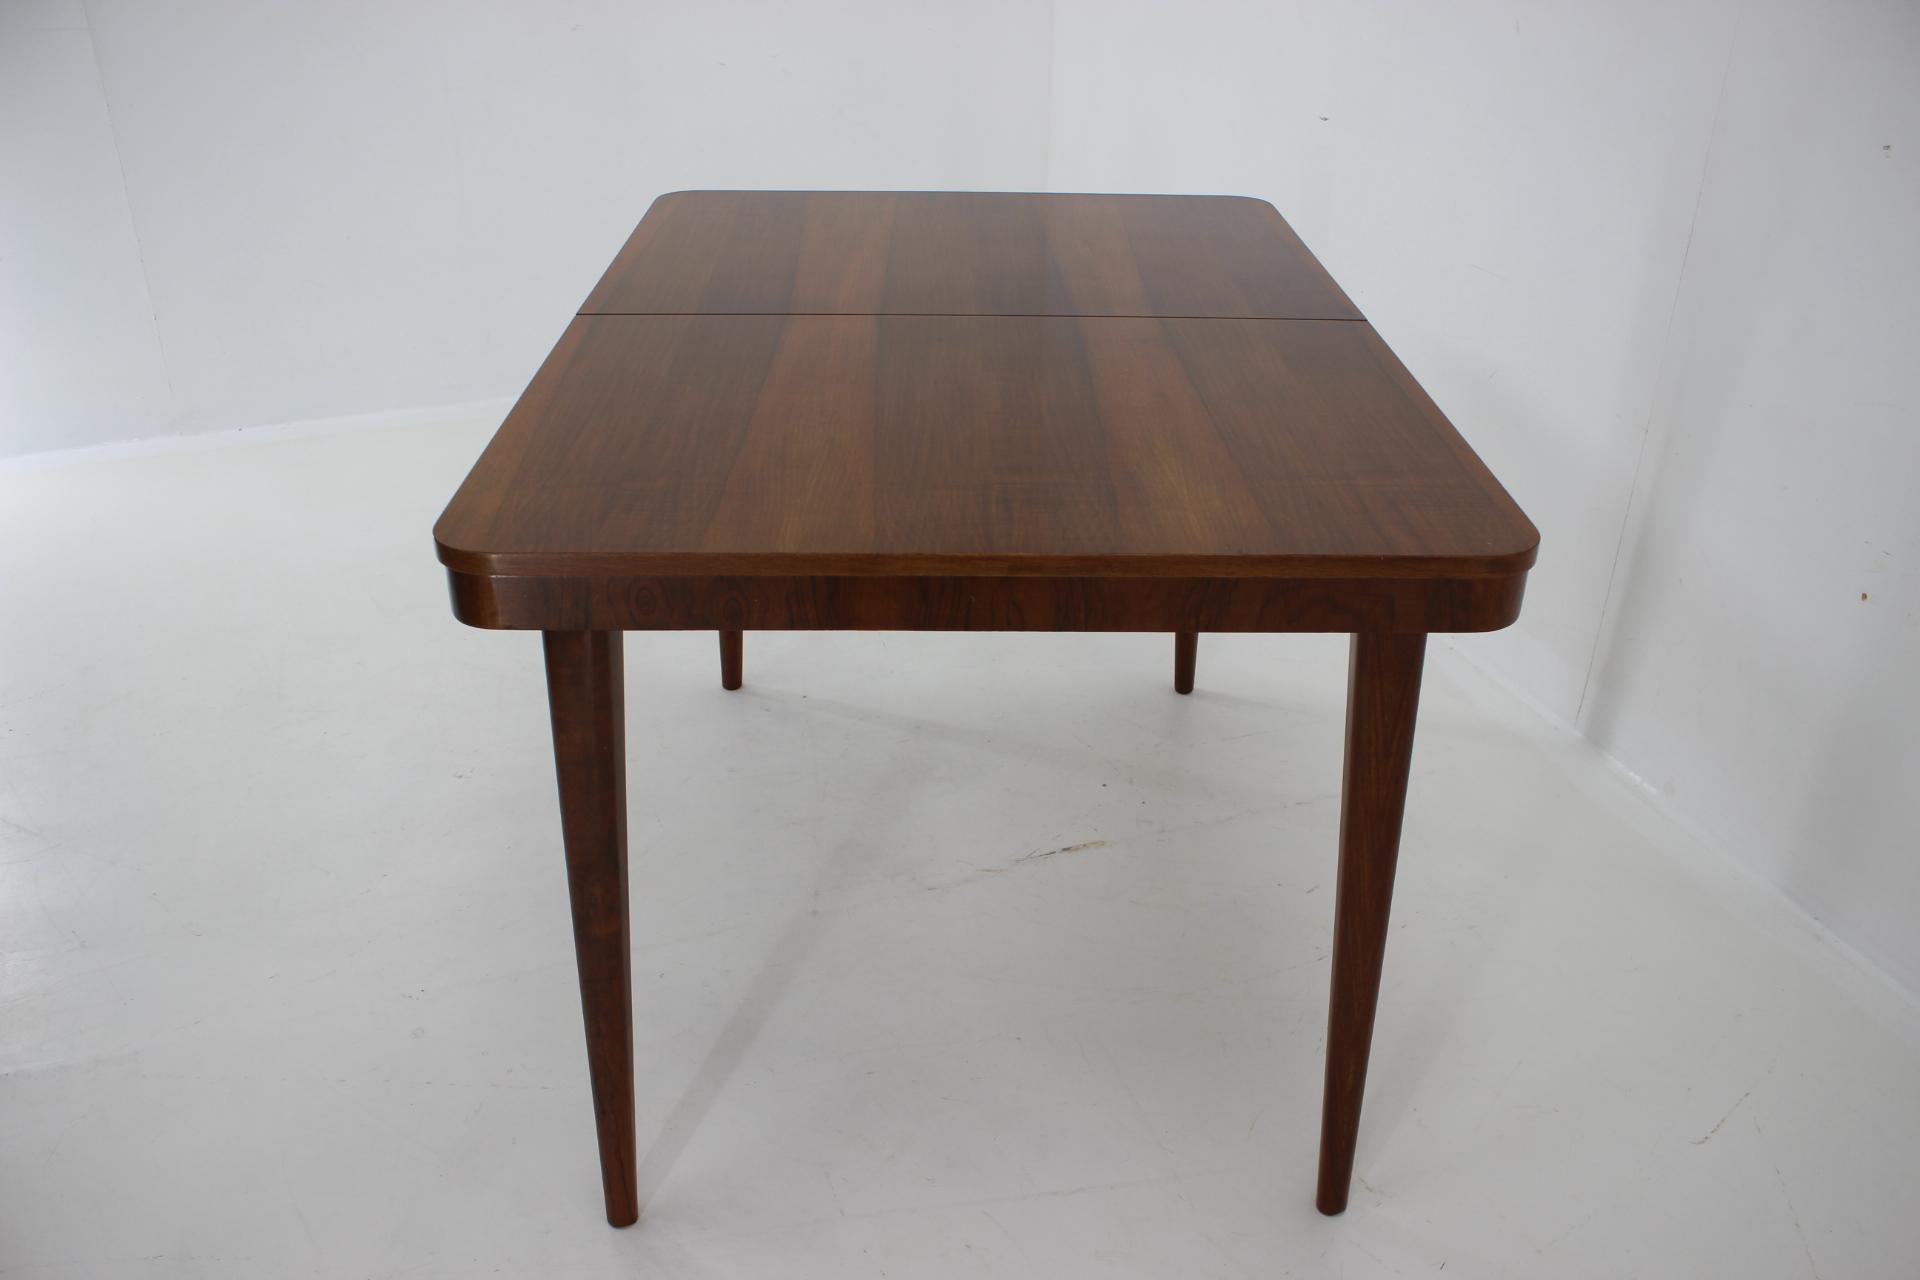 1950s Extendable Dining Table in Walnut by UP zavody, Czechoslovakia For Sale 1